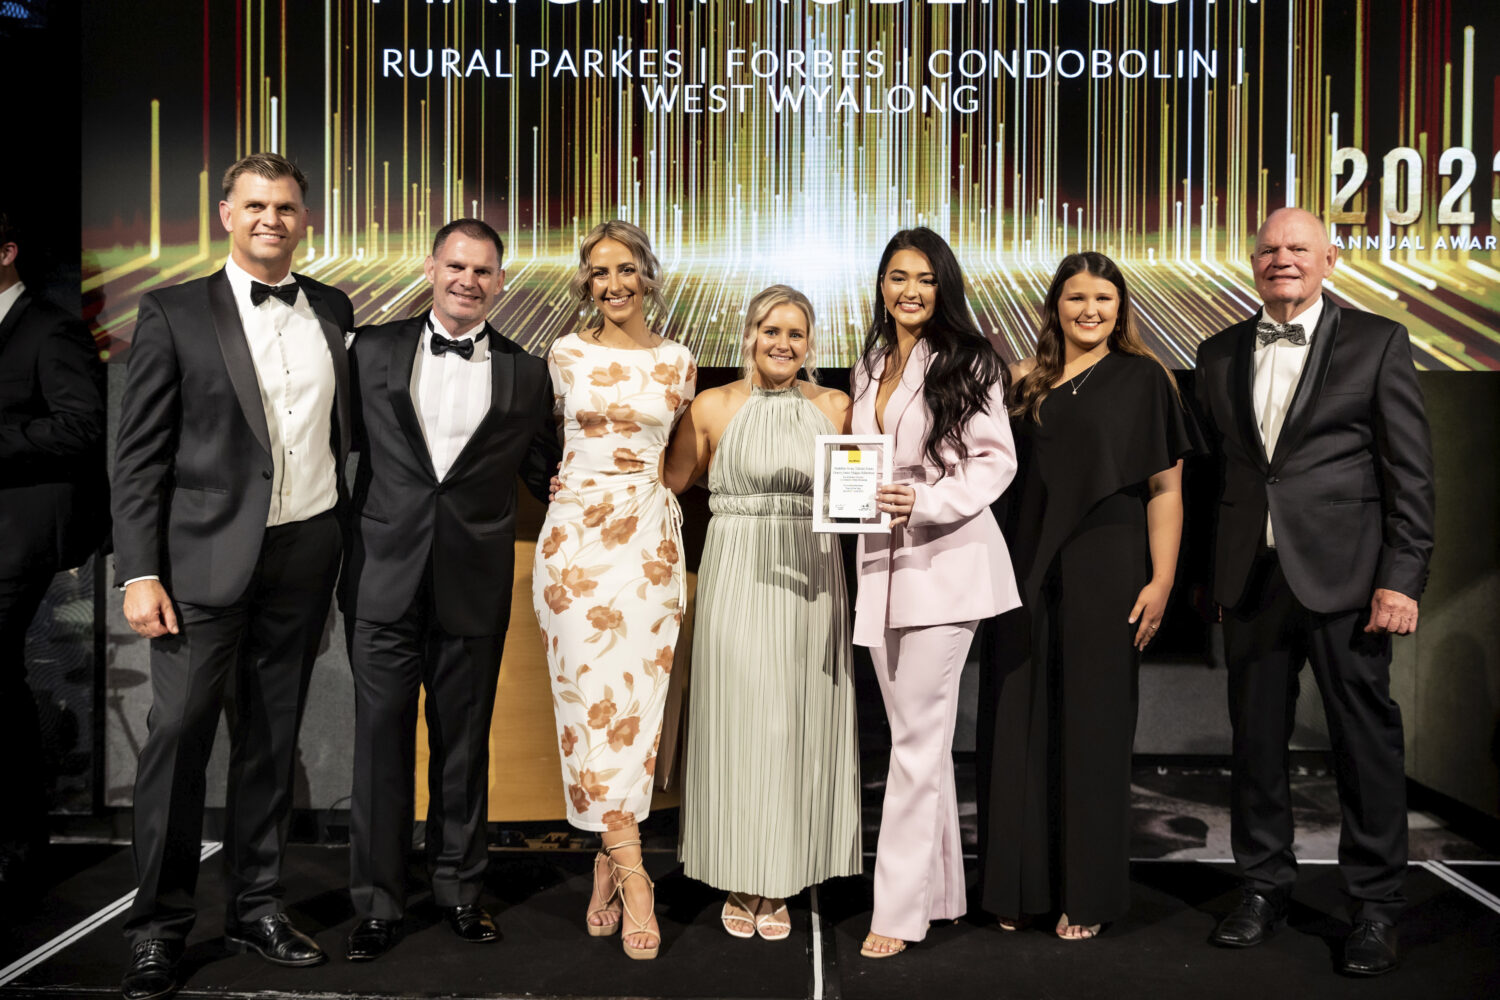 Ray White Parkes, Forbes, Condobolin, West Wyalong was recognised as the Administration Team for the Year at the recent White Rural annual awards. Image Contributed.